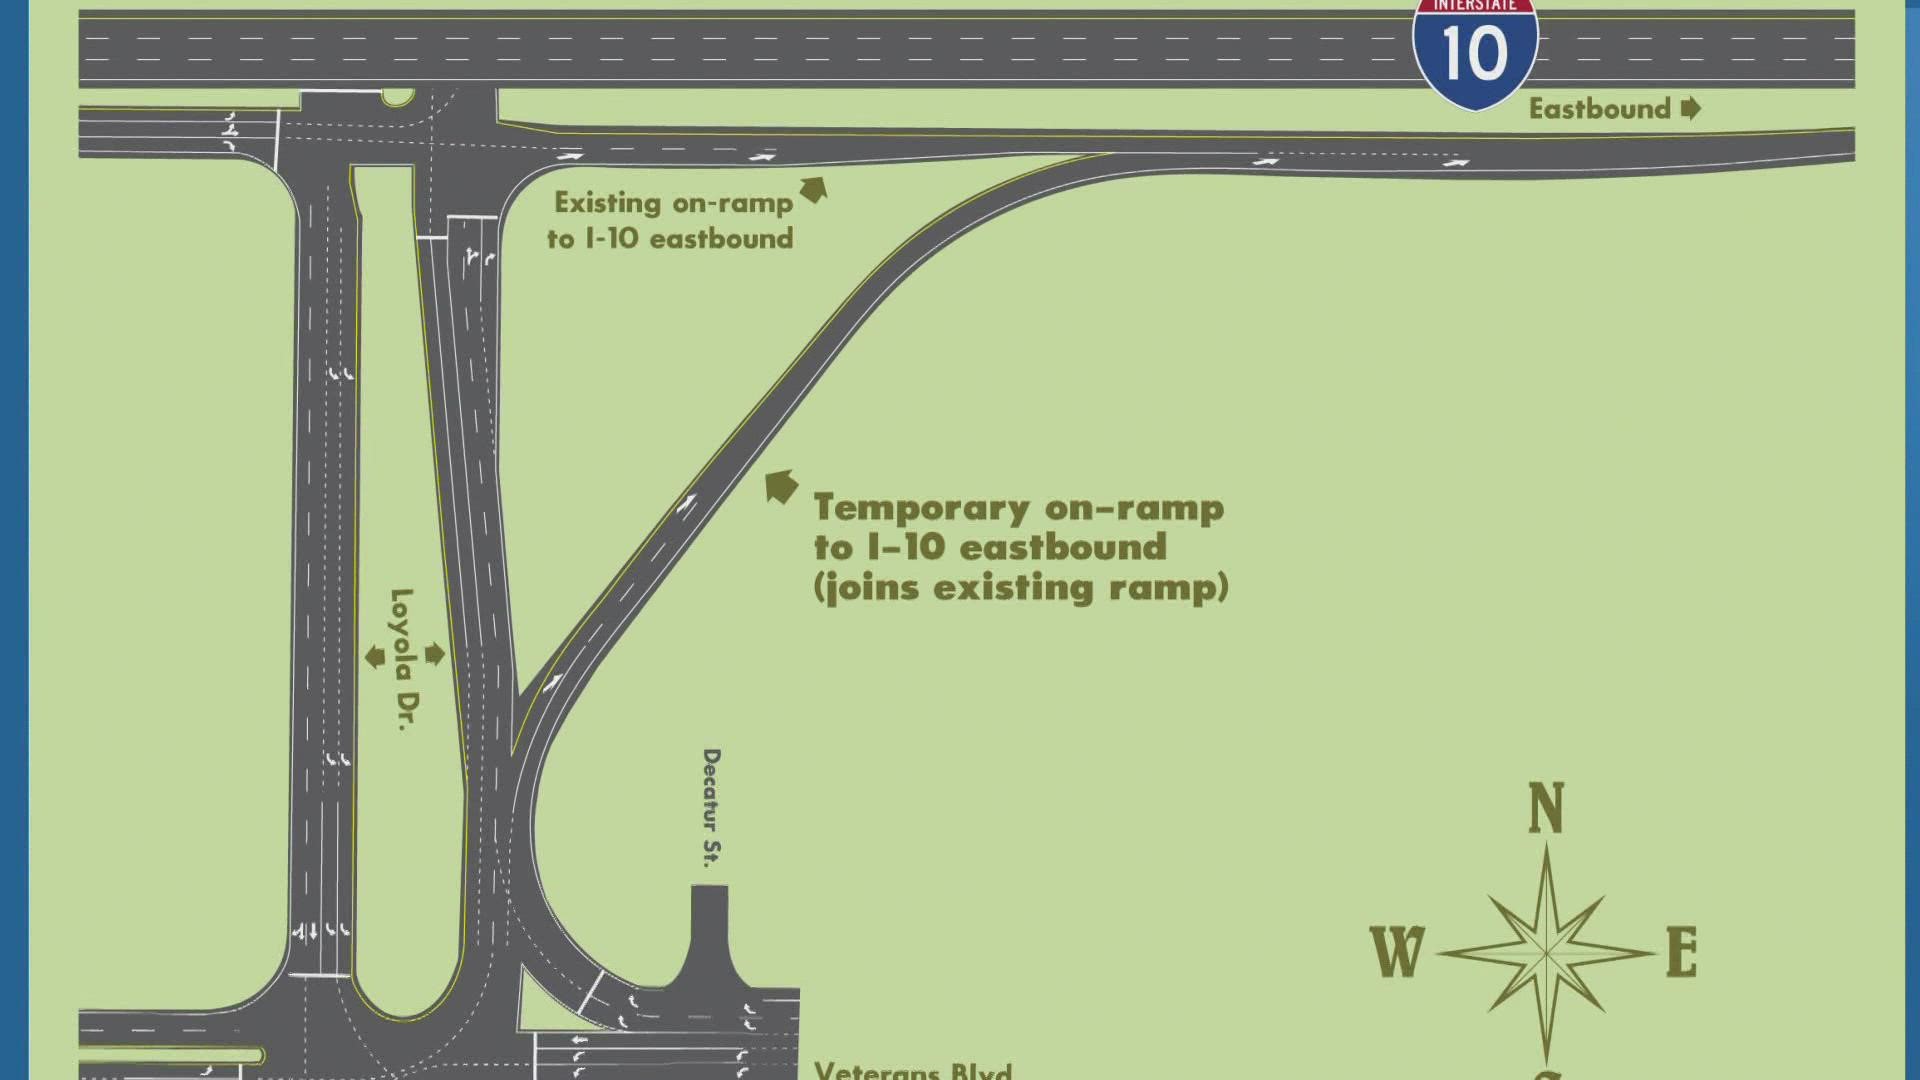 A temporary ramp connecting Veterans Memorial and the airport will open Sunday ahead of the busy holiday traffic.